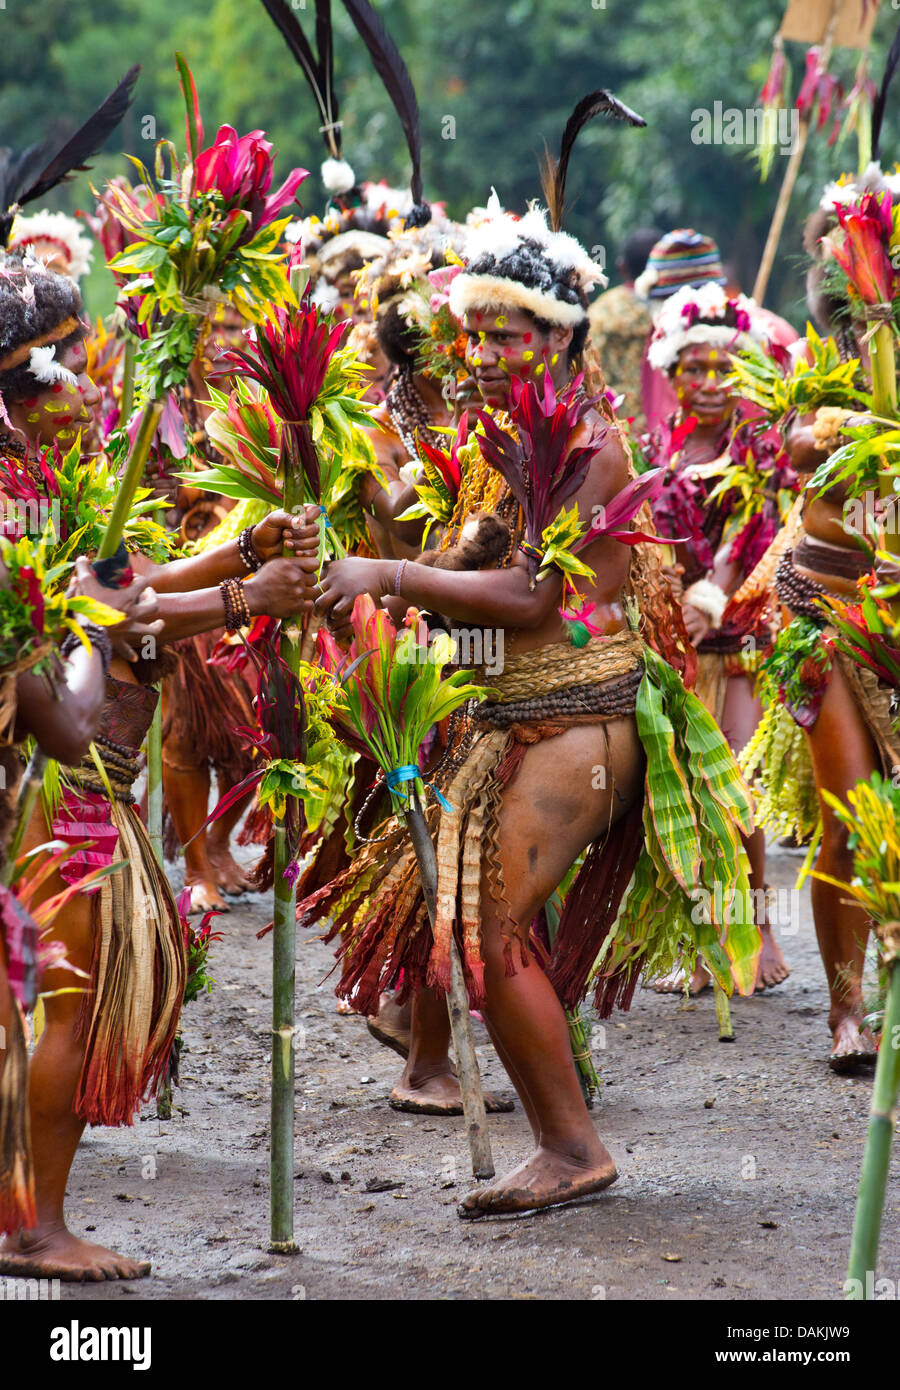 Stylish.ae Tales: Dancing With Tribes In Papua New Guinea.